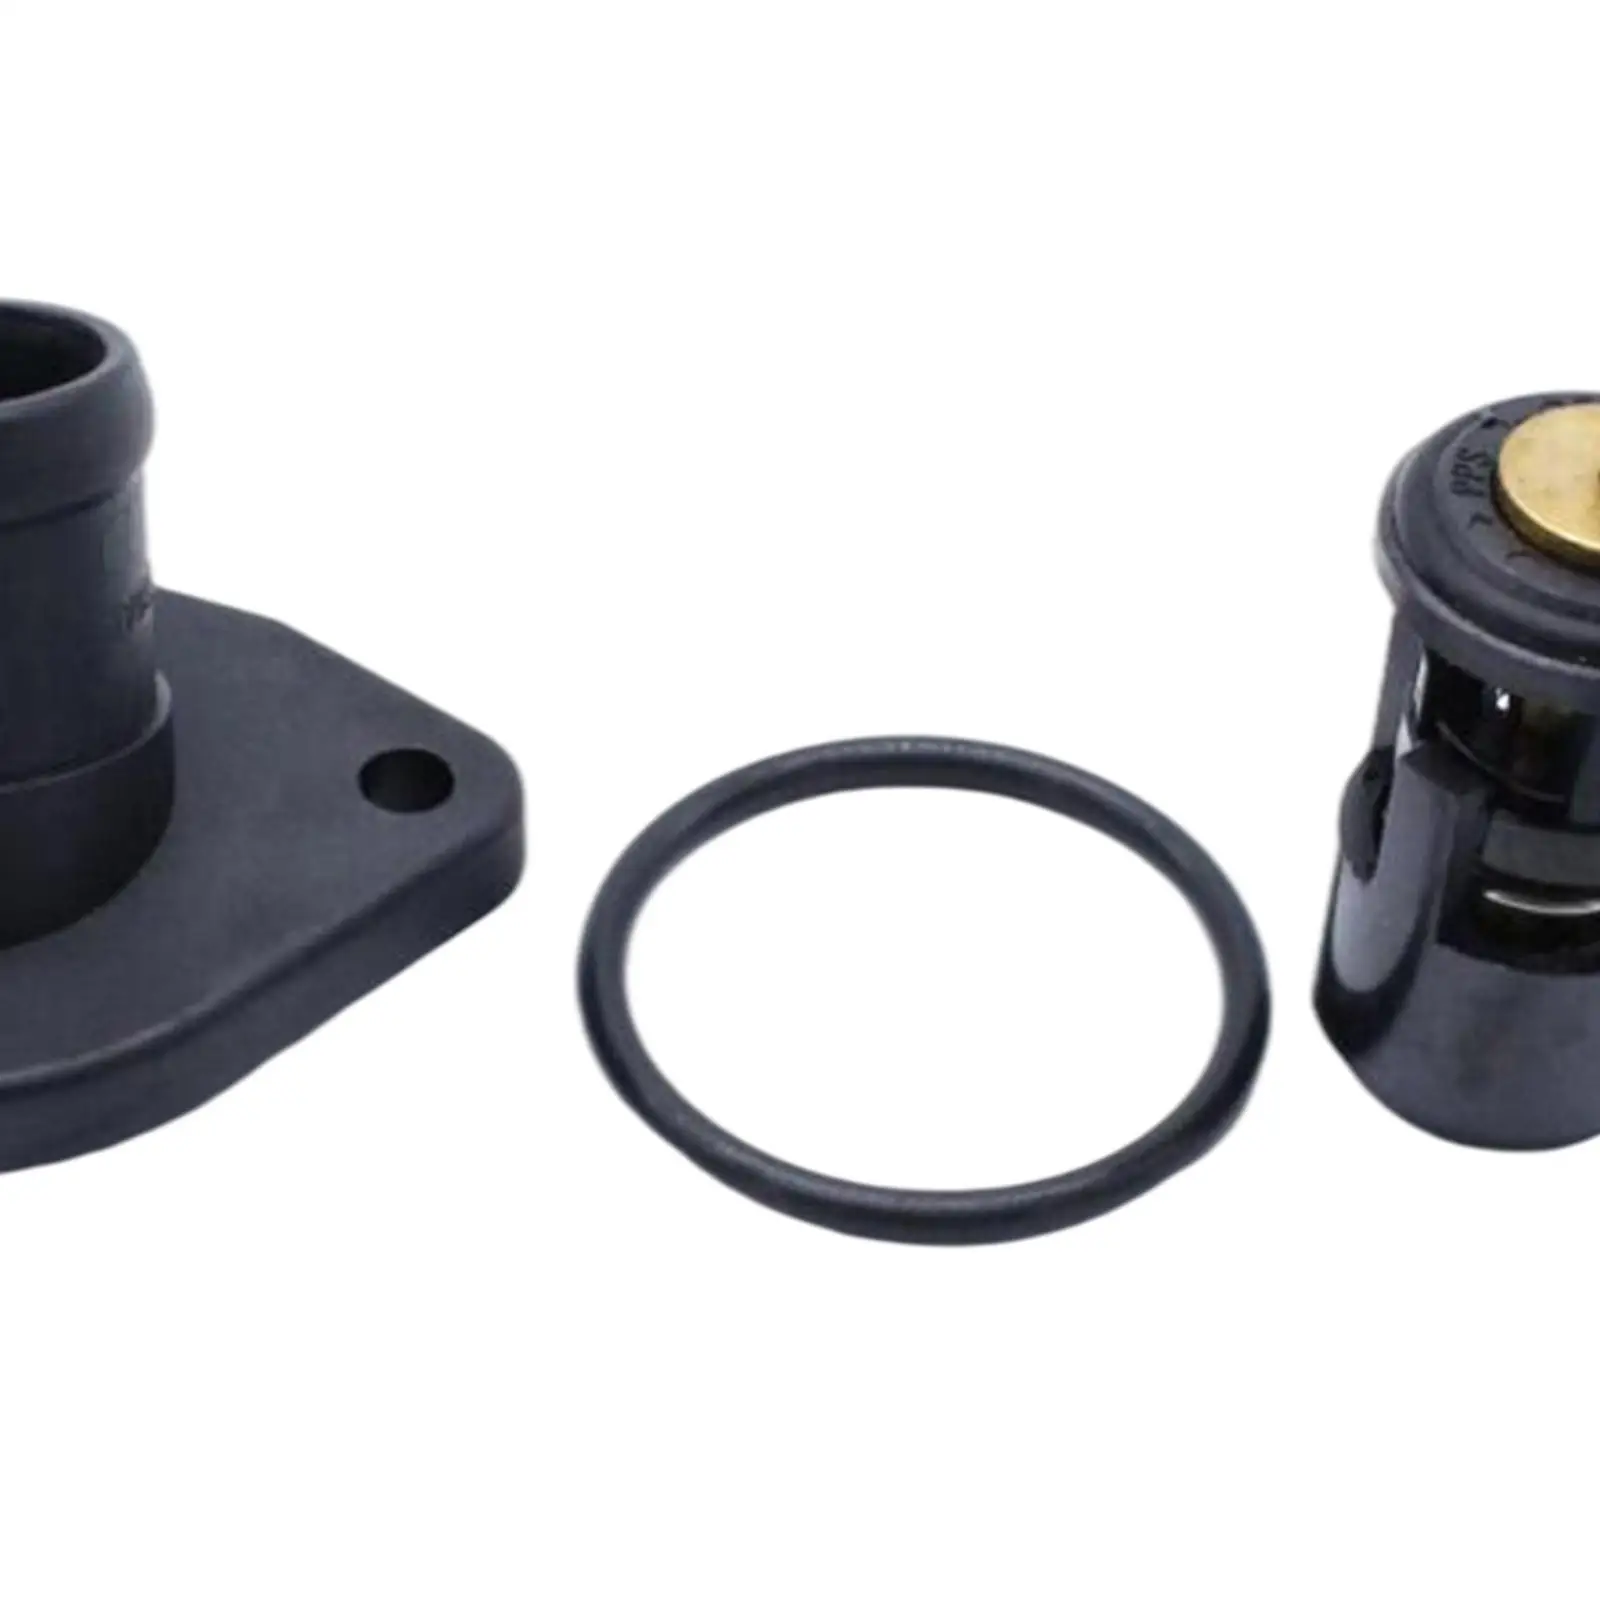  Kit with Coolant Flange 032121121B+03212111042 Replacement  Durable High Performance Easy to Install